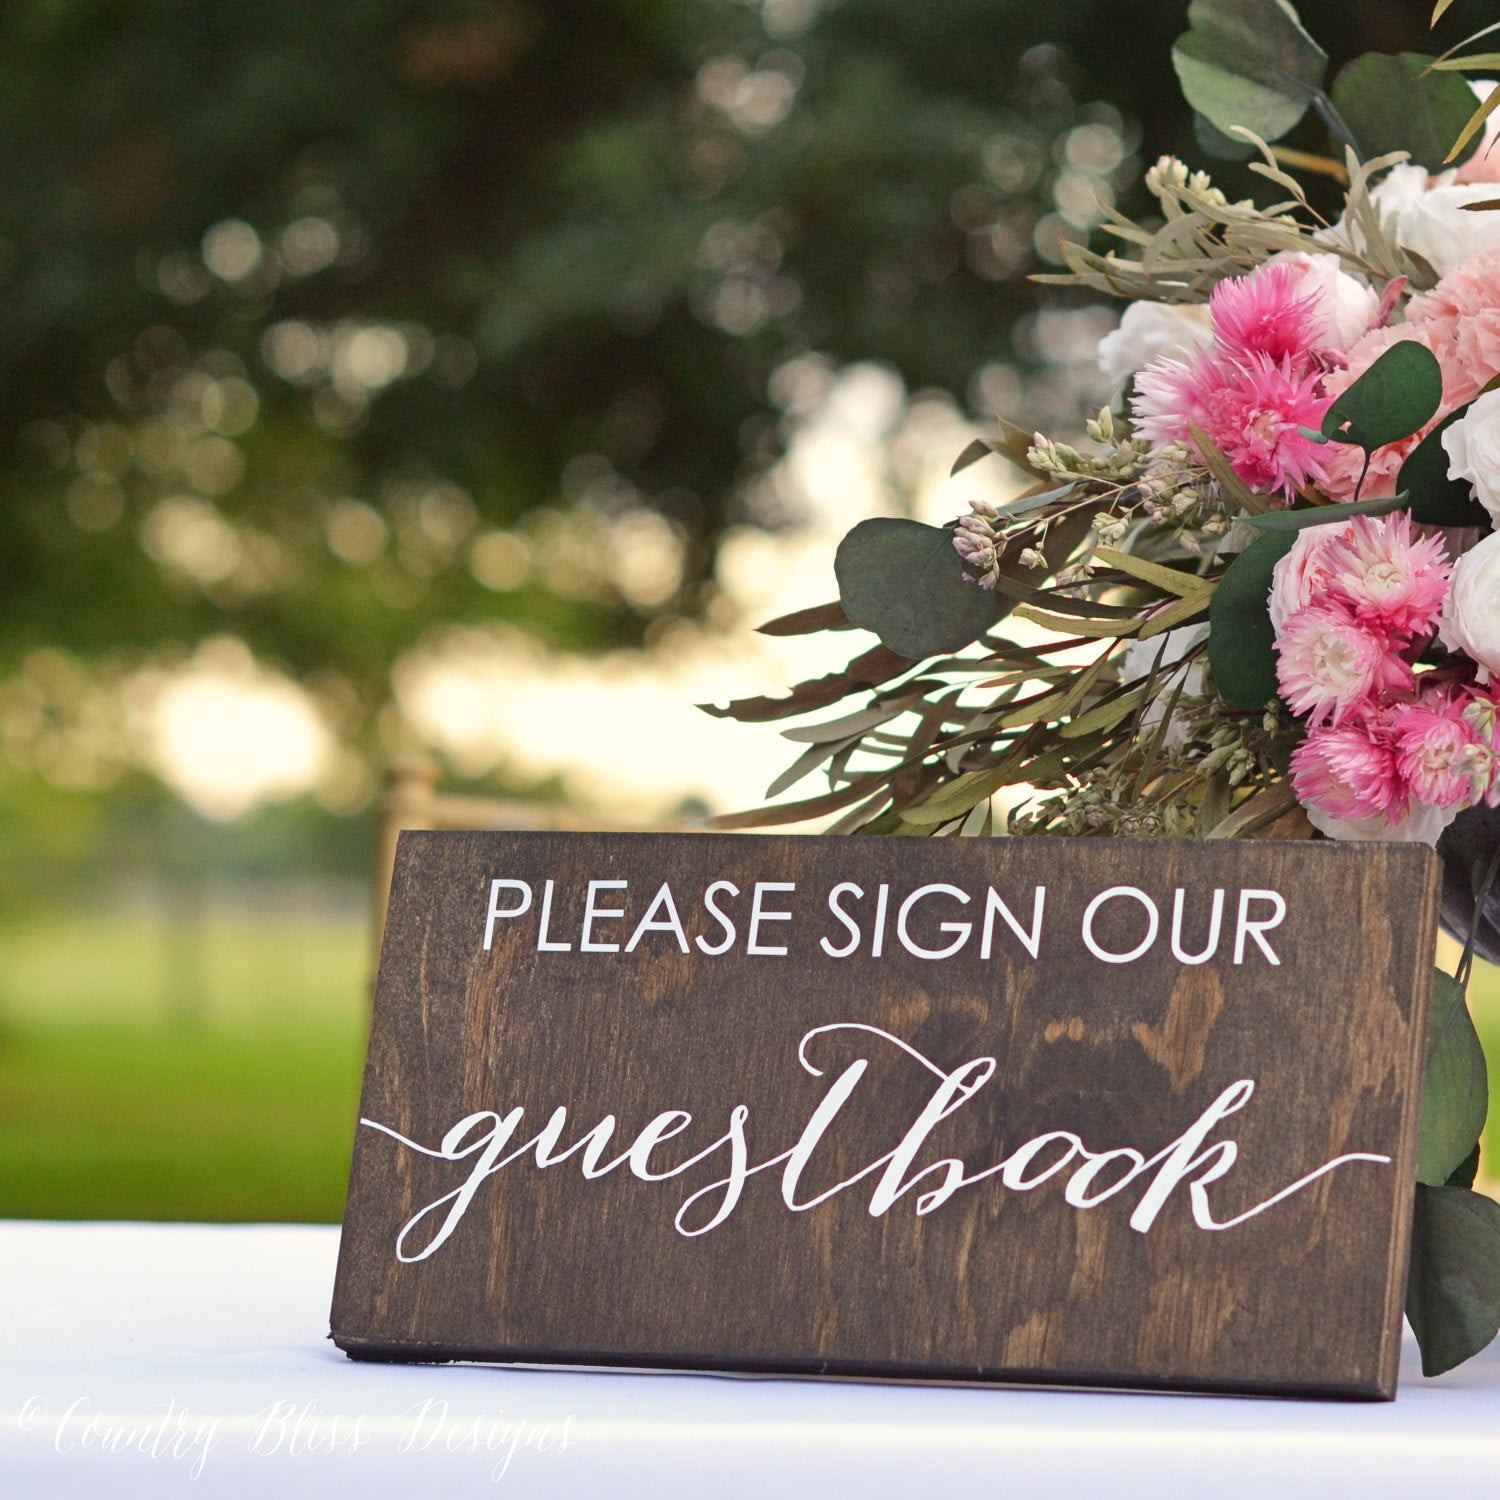 Signing Guest Book Wedding
 Guest book Sign Wedding Guestbook Sign Please Sign Our